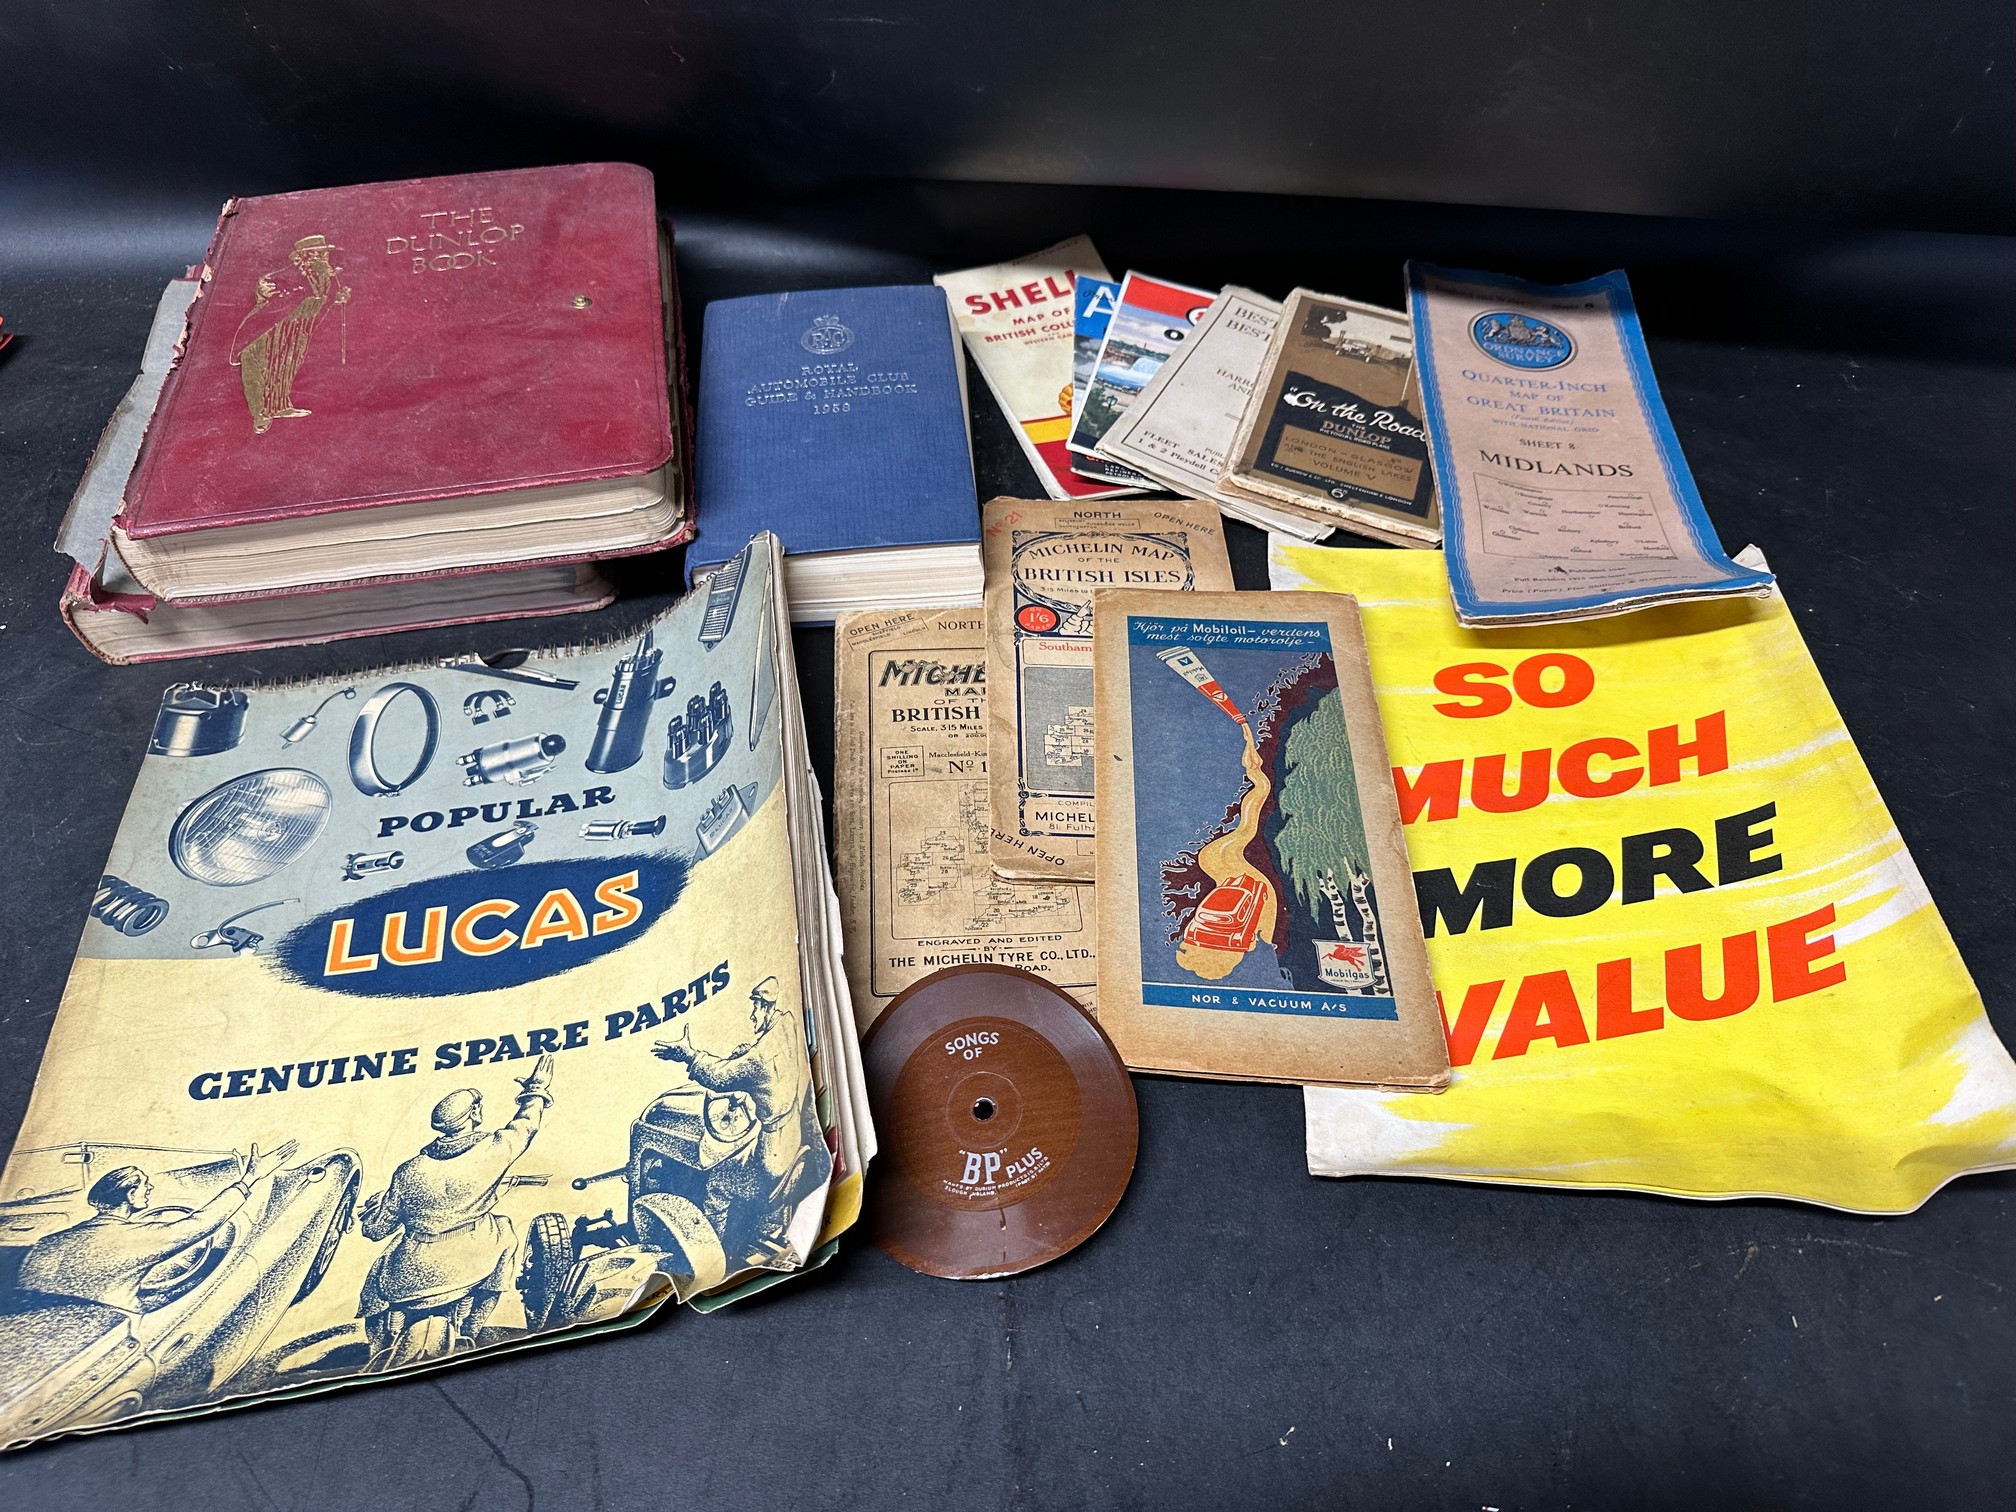 Two editions of The Dunlop Book, a 1958 RAC Guide and Handbook, a Lucas parts hanging chart, various